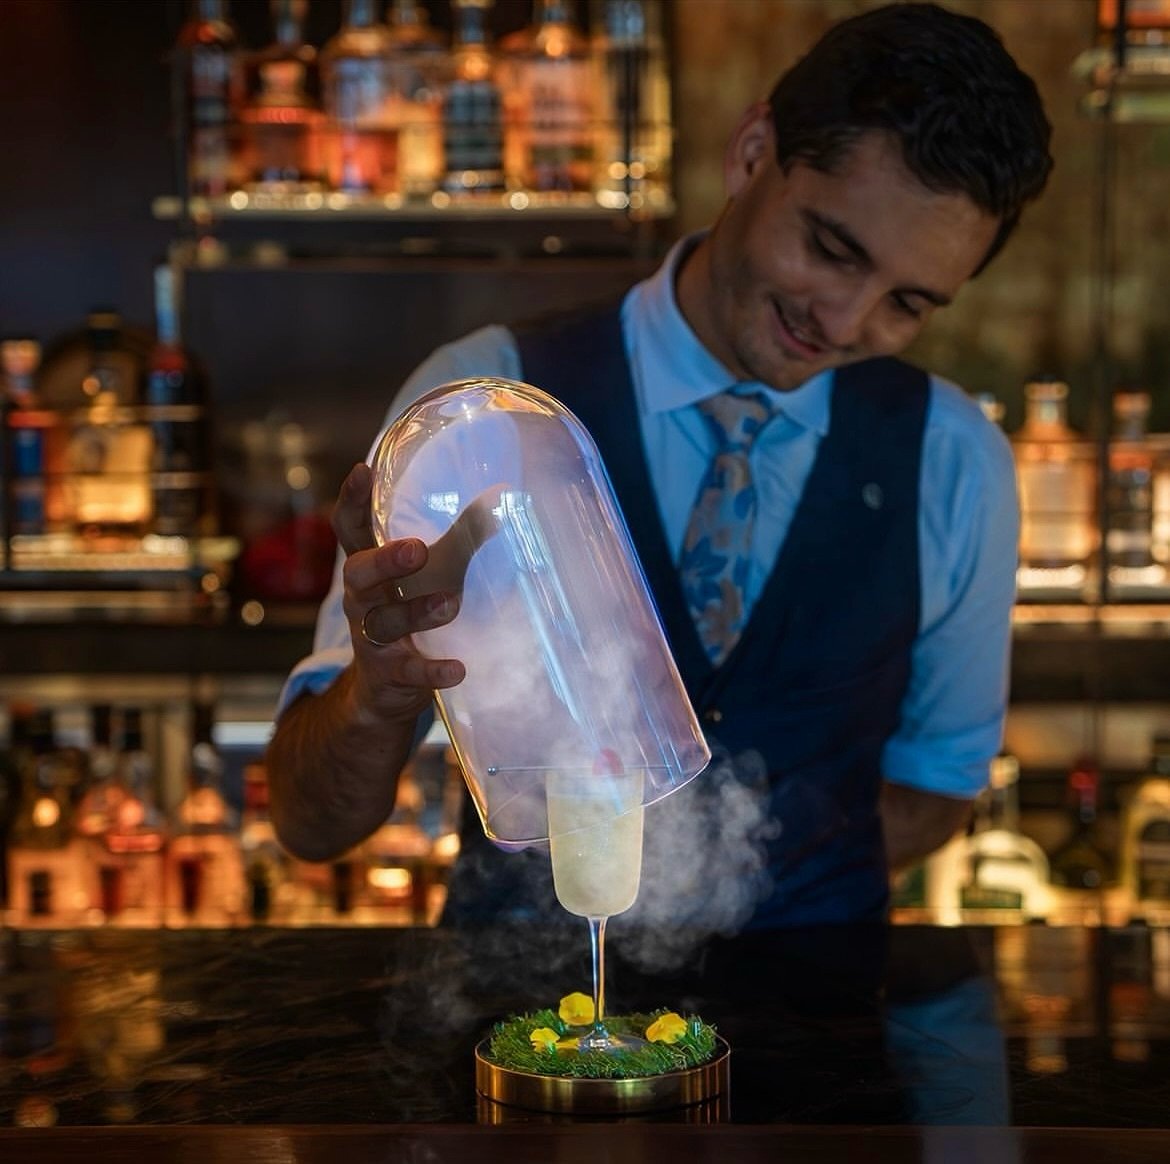 The &ldquo;Heart of the Garden&rdquo; is a star cocktail on a new menu at the iconic @grainbarsyd by Four Seasons. Featuring our own Good Spirits Co. Australian Baijiu, this elegant and mouthwatering cocktail will not just thrill your senses but will